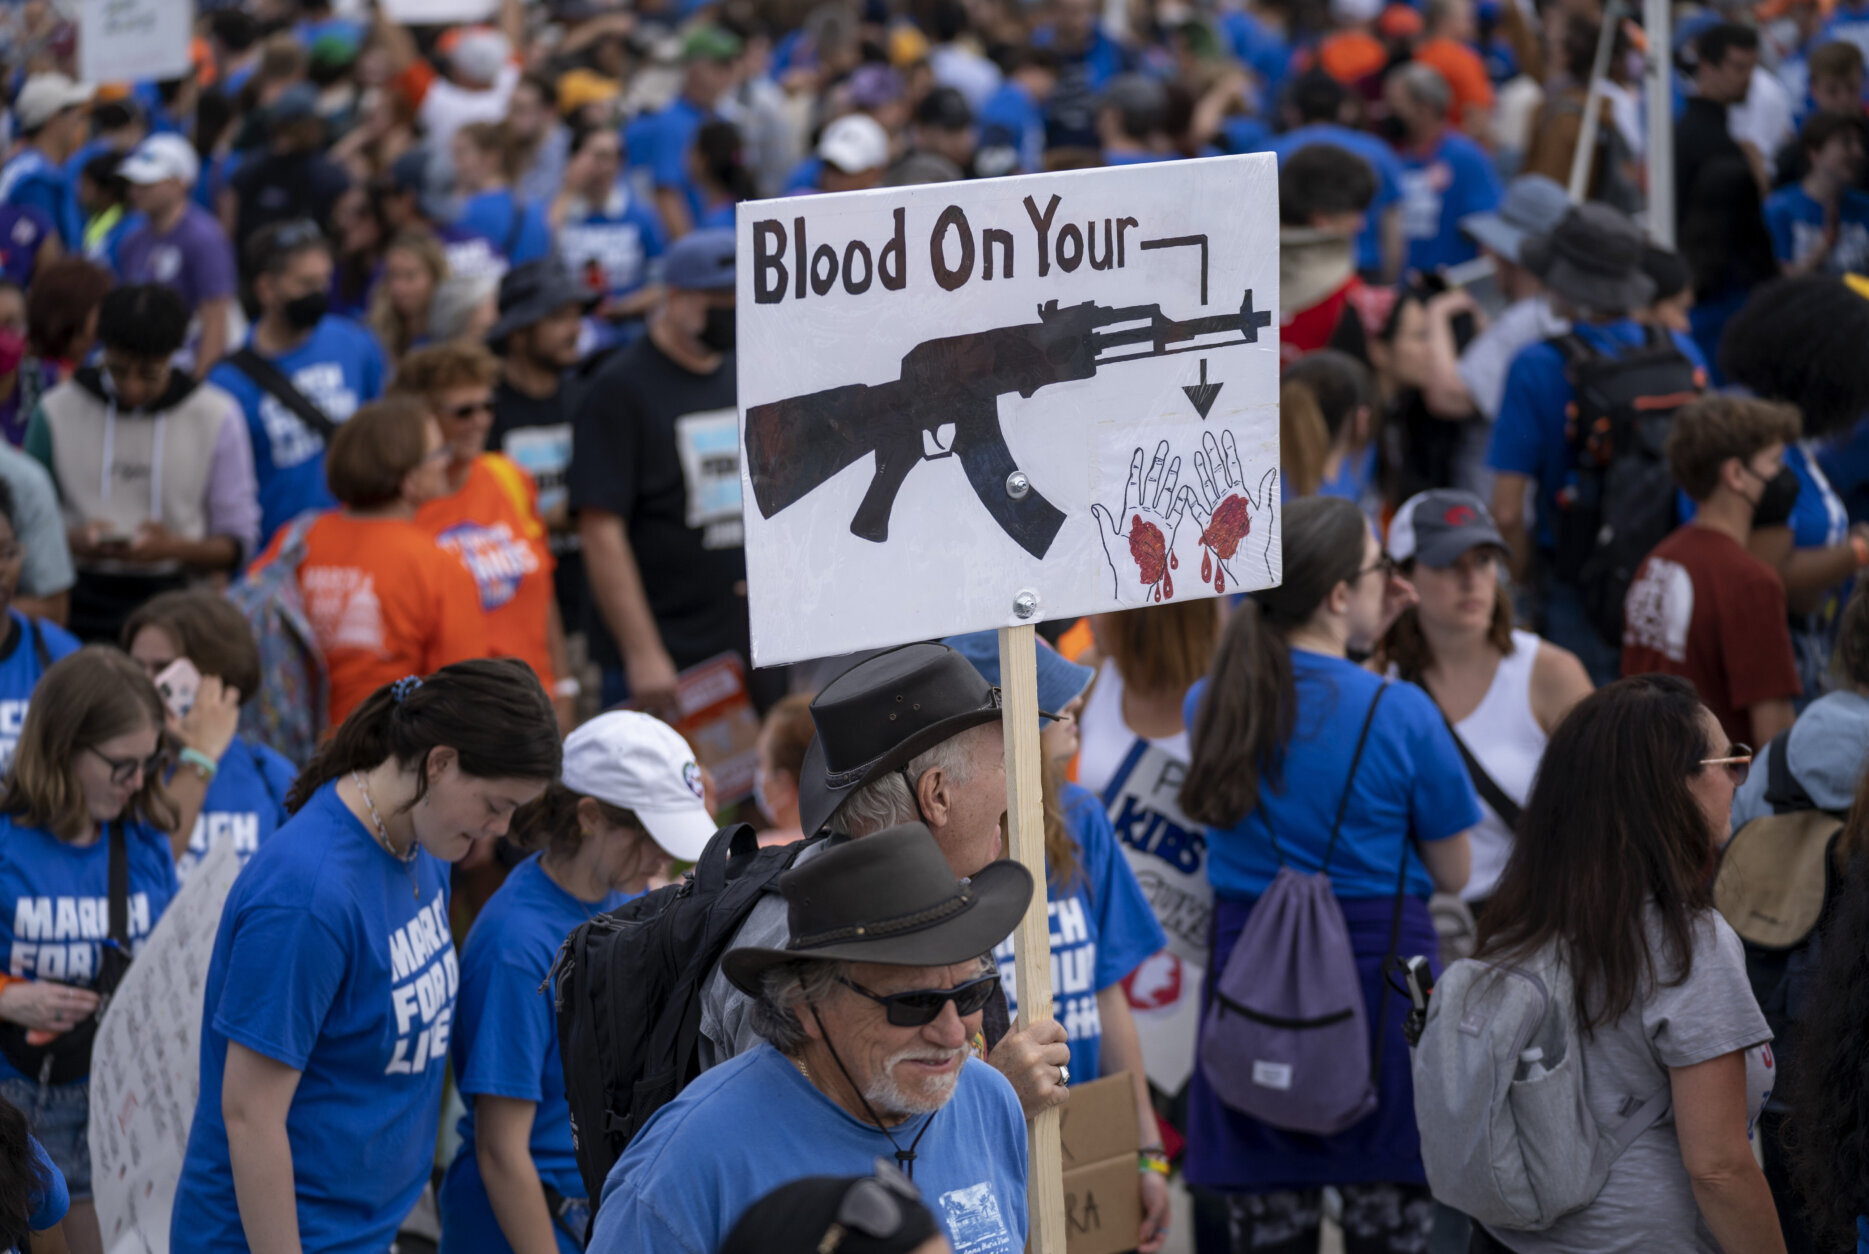 People display placards during the second March for Our Lives rally in support of gun control, Saturday, June 11, 2022, in Washington. The rally is a successor to the 2018 march organized by student protestors after the mass shooting at a high school in Parkland, Fla. (AP Photo/Gemunu Amarasinghe)